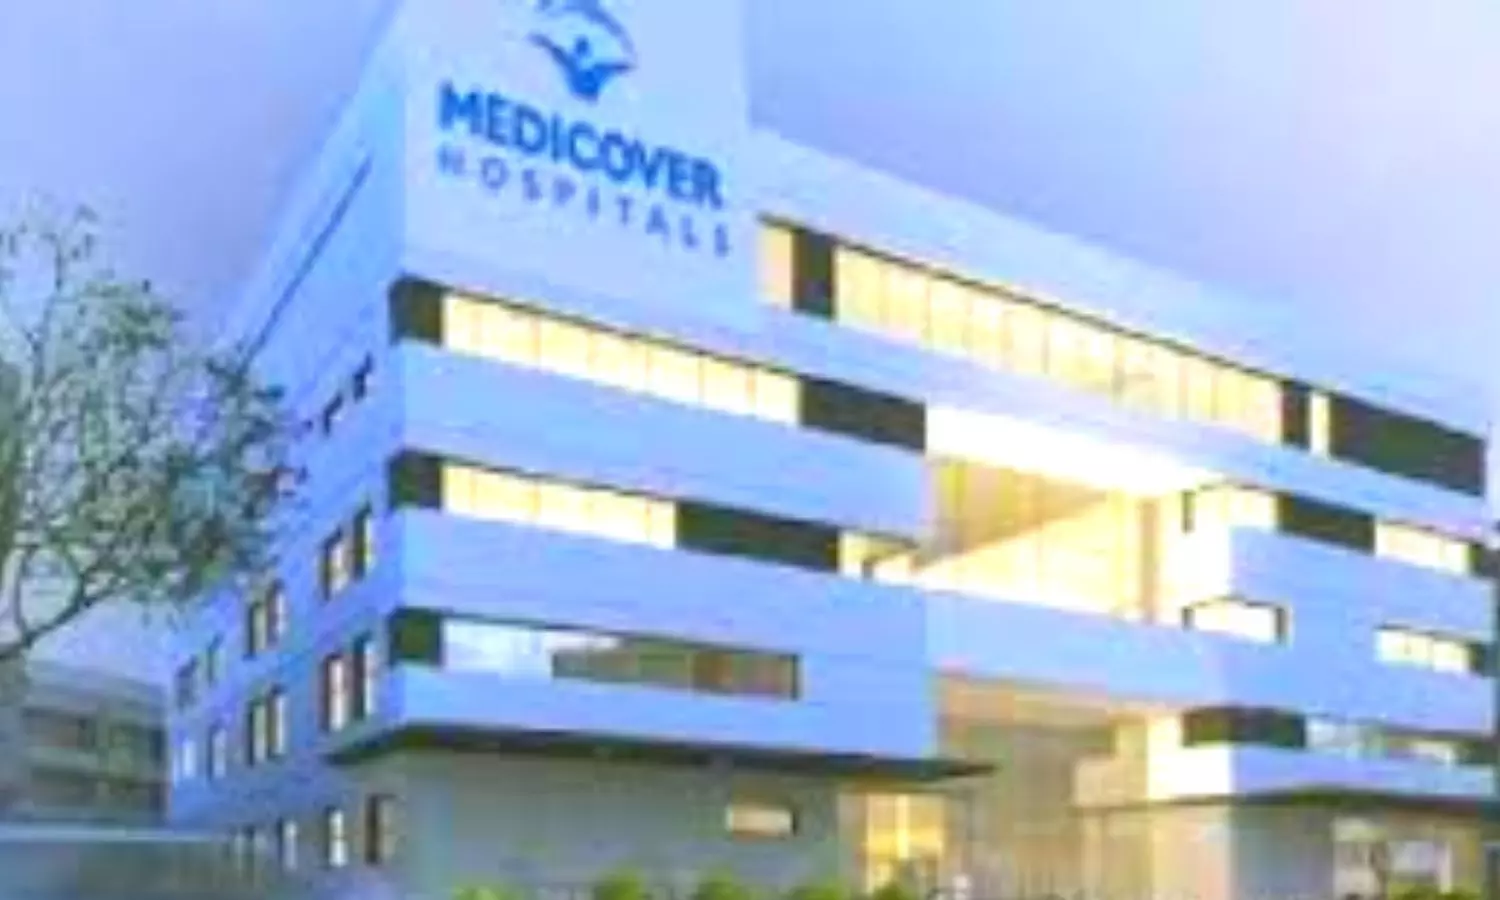 Doctors at Medicover Hospital save life of 9-year-old who suffered heart attack 3 times